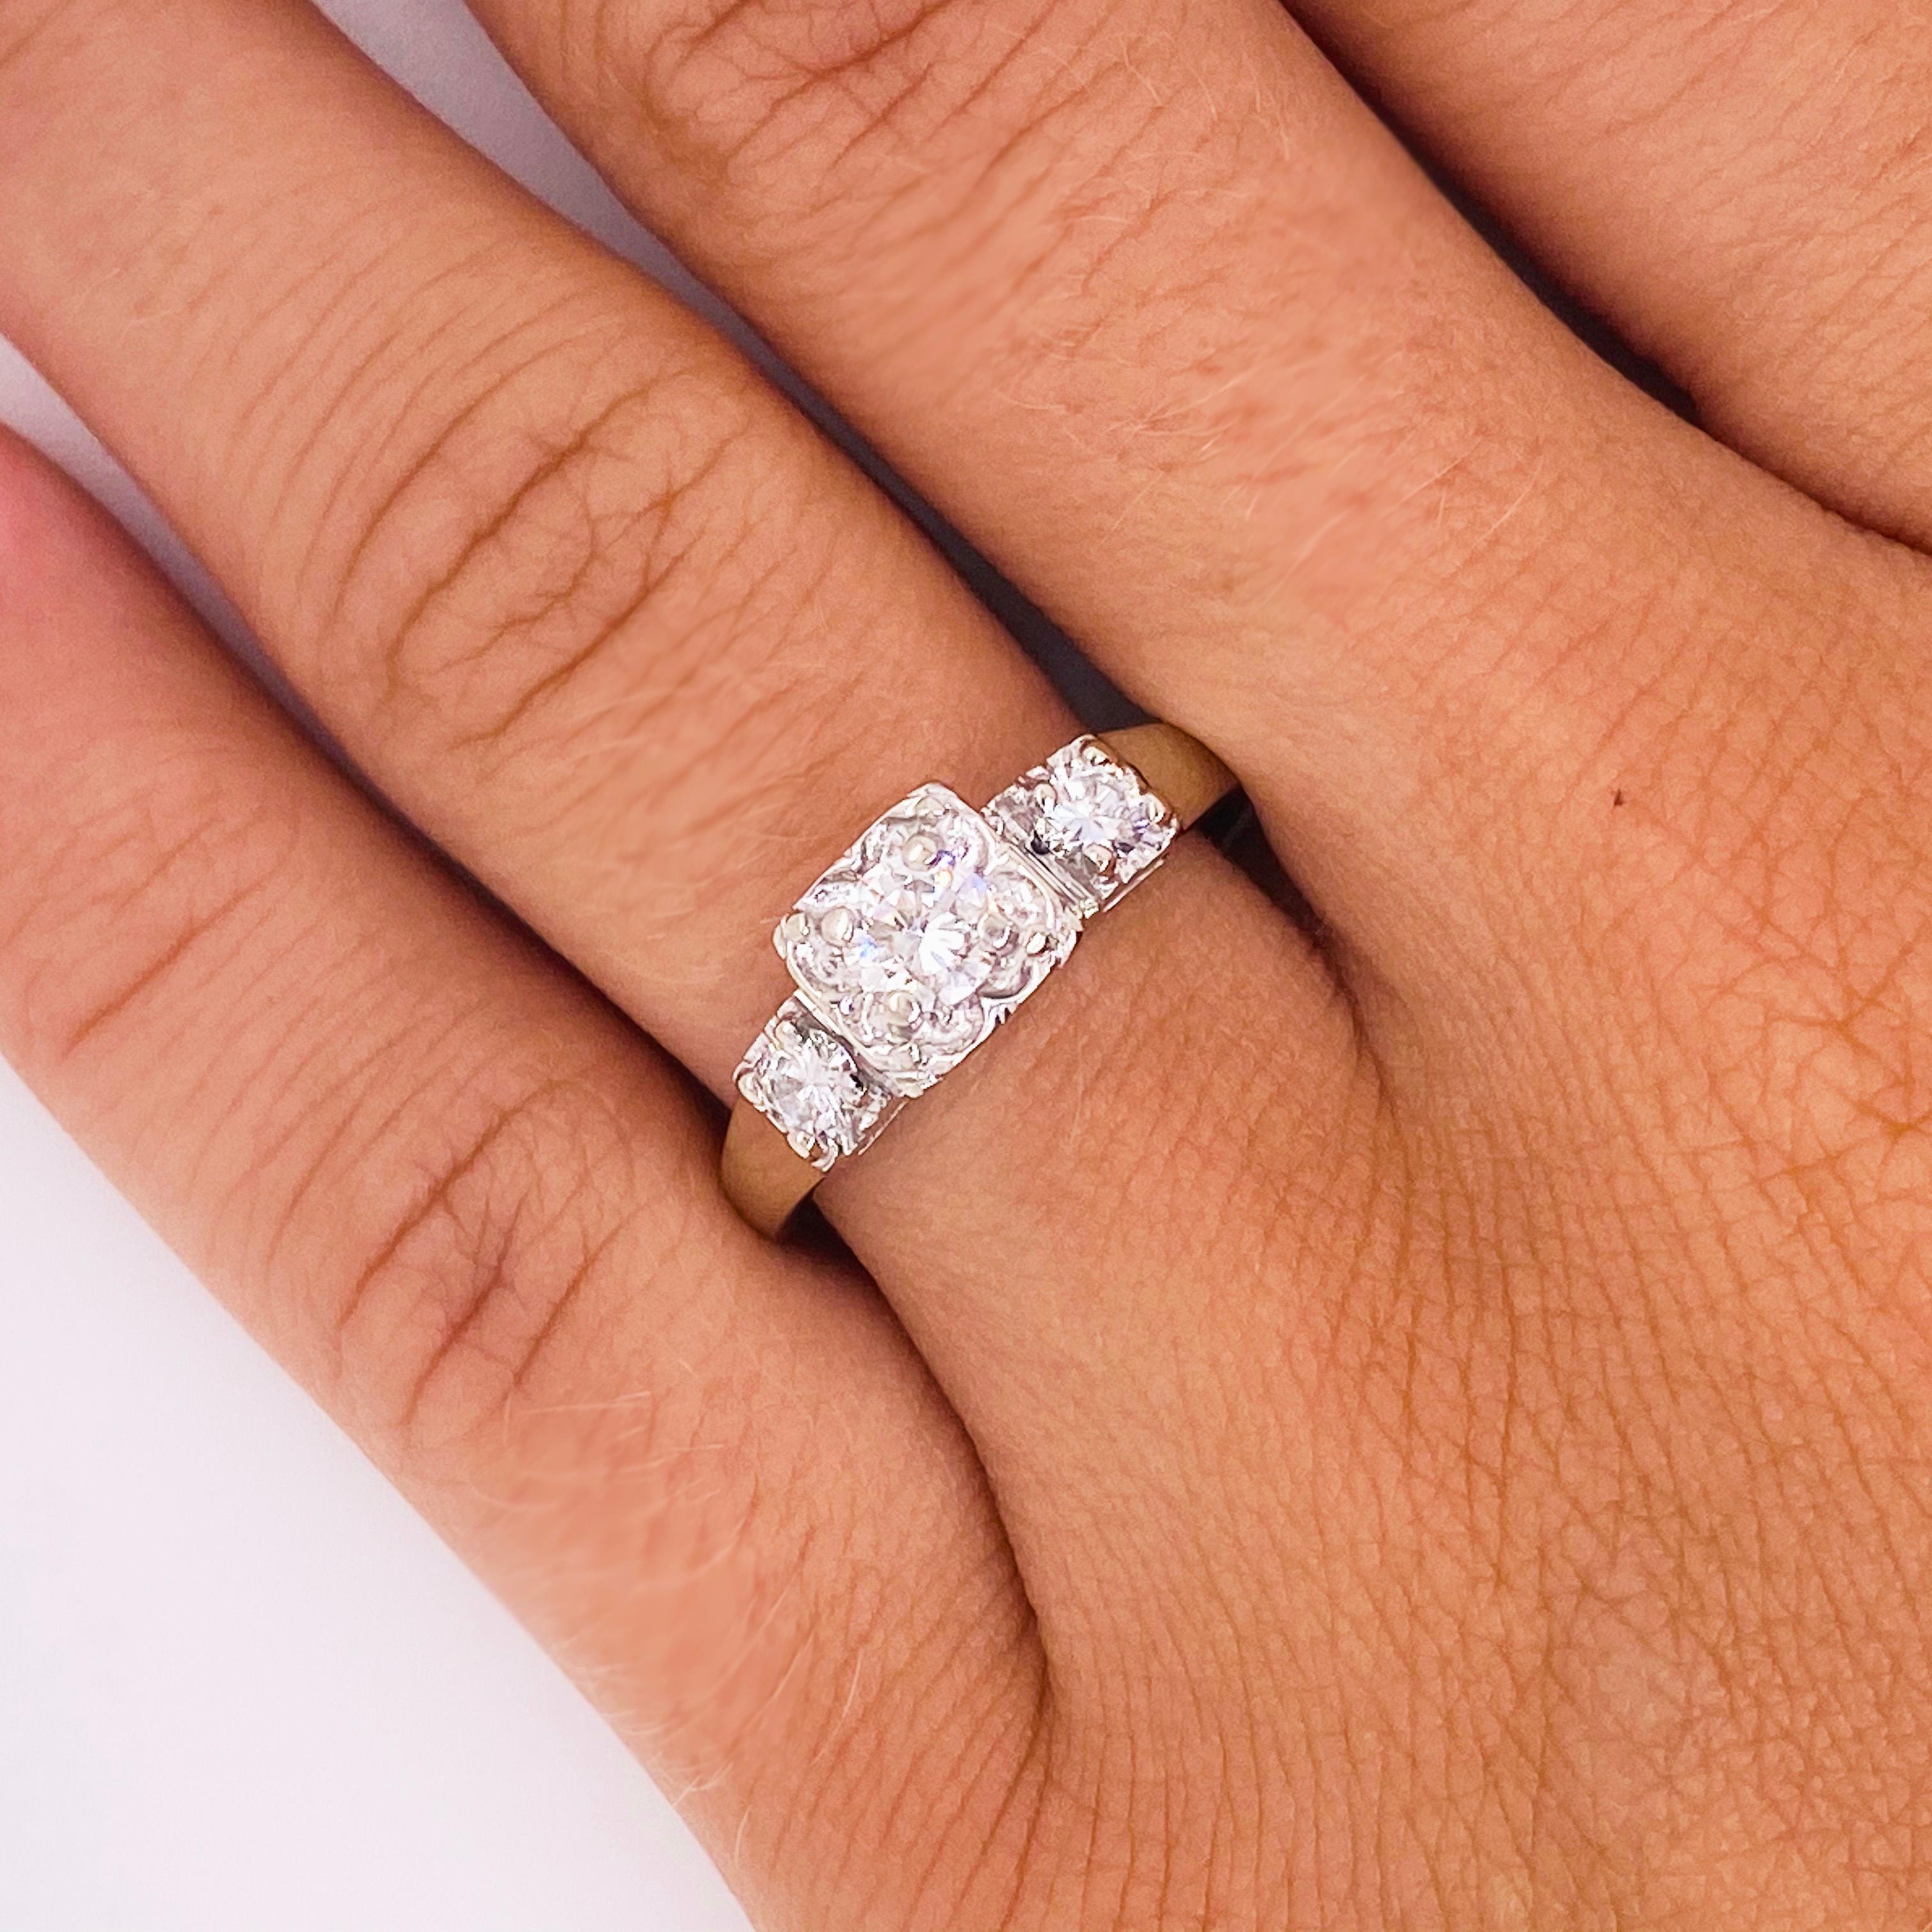 This 1950's diamond engagement ring is an estate piece that is from a loving family! Think of the years that this ring was coveted by a special woman!  Such love in each diamond, such joy in each diamond.  The ring will last another 70 years as the